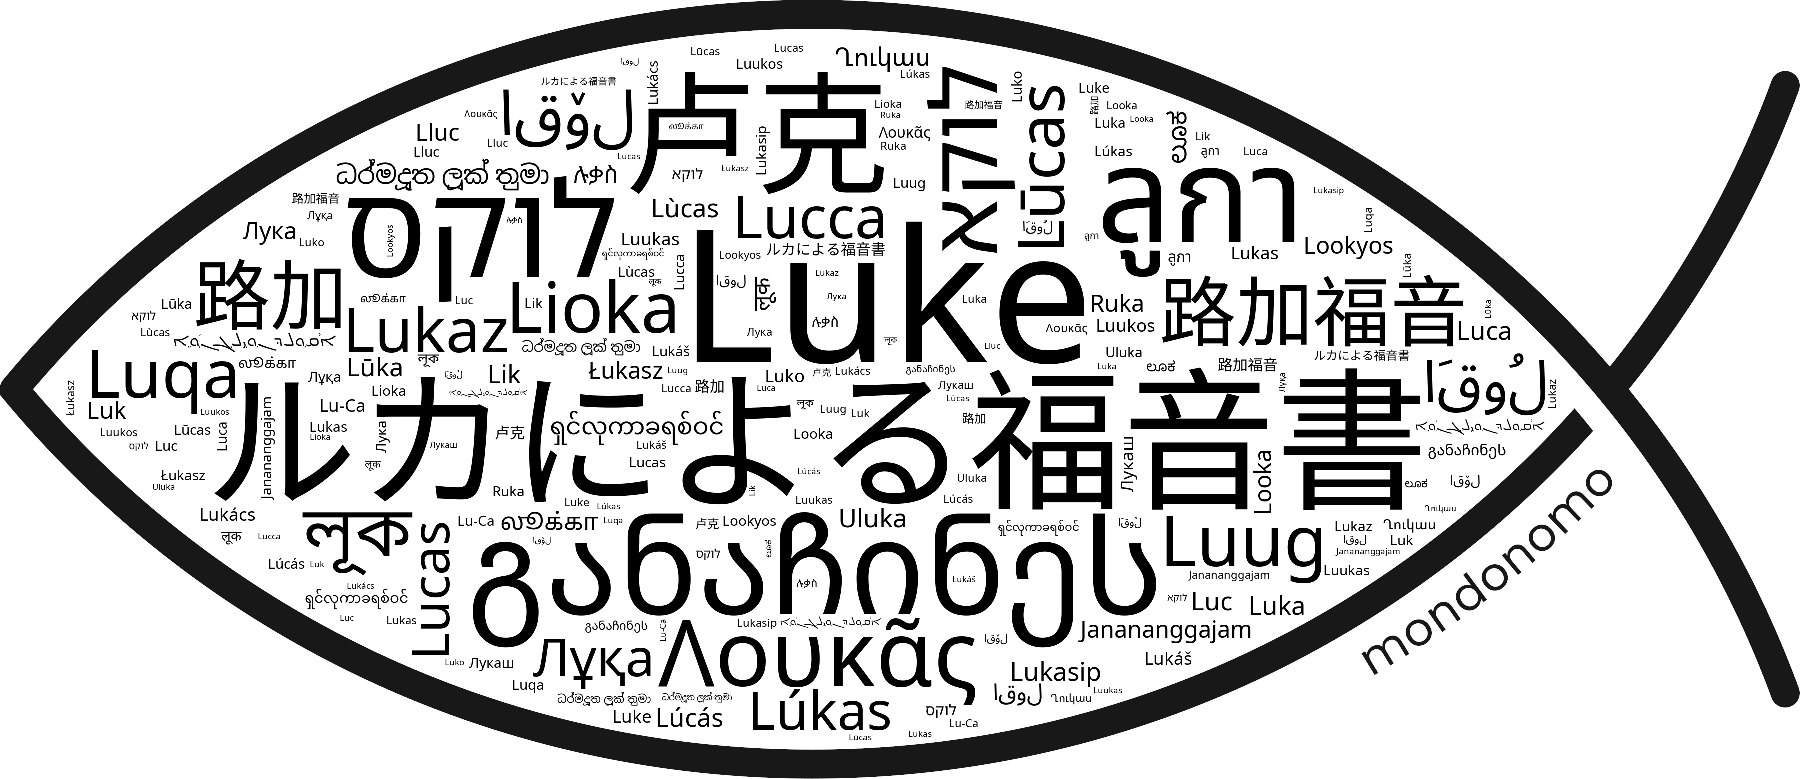 Name Luke in the world's Bibles